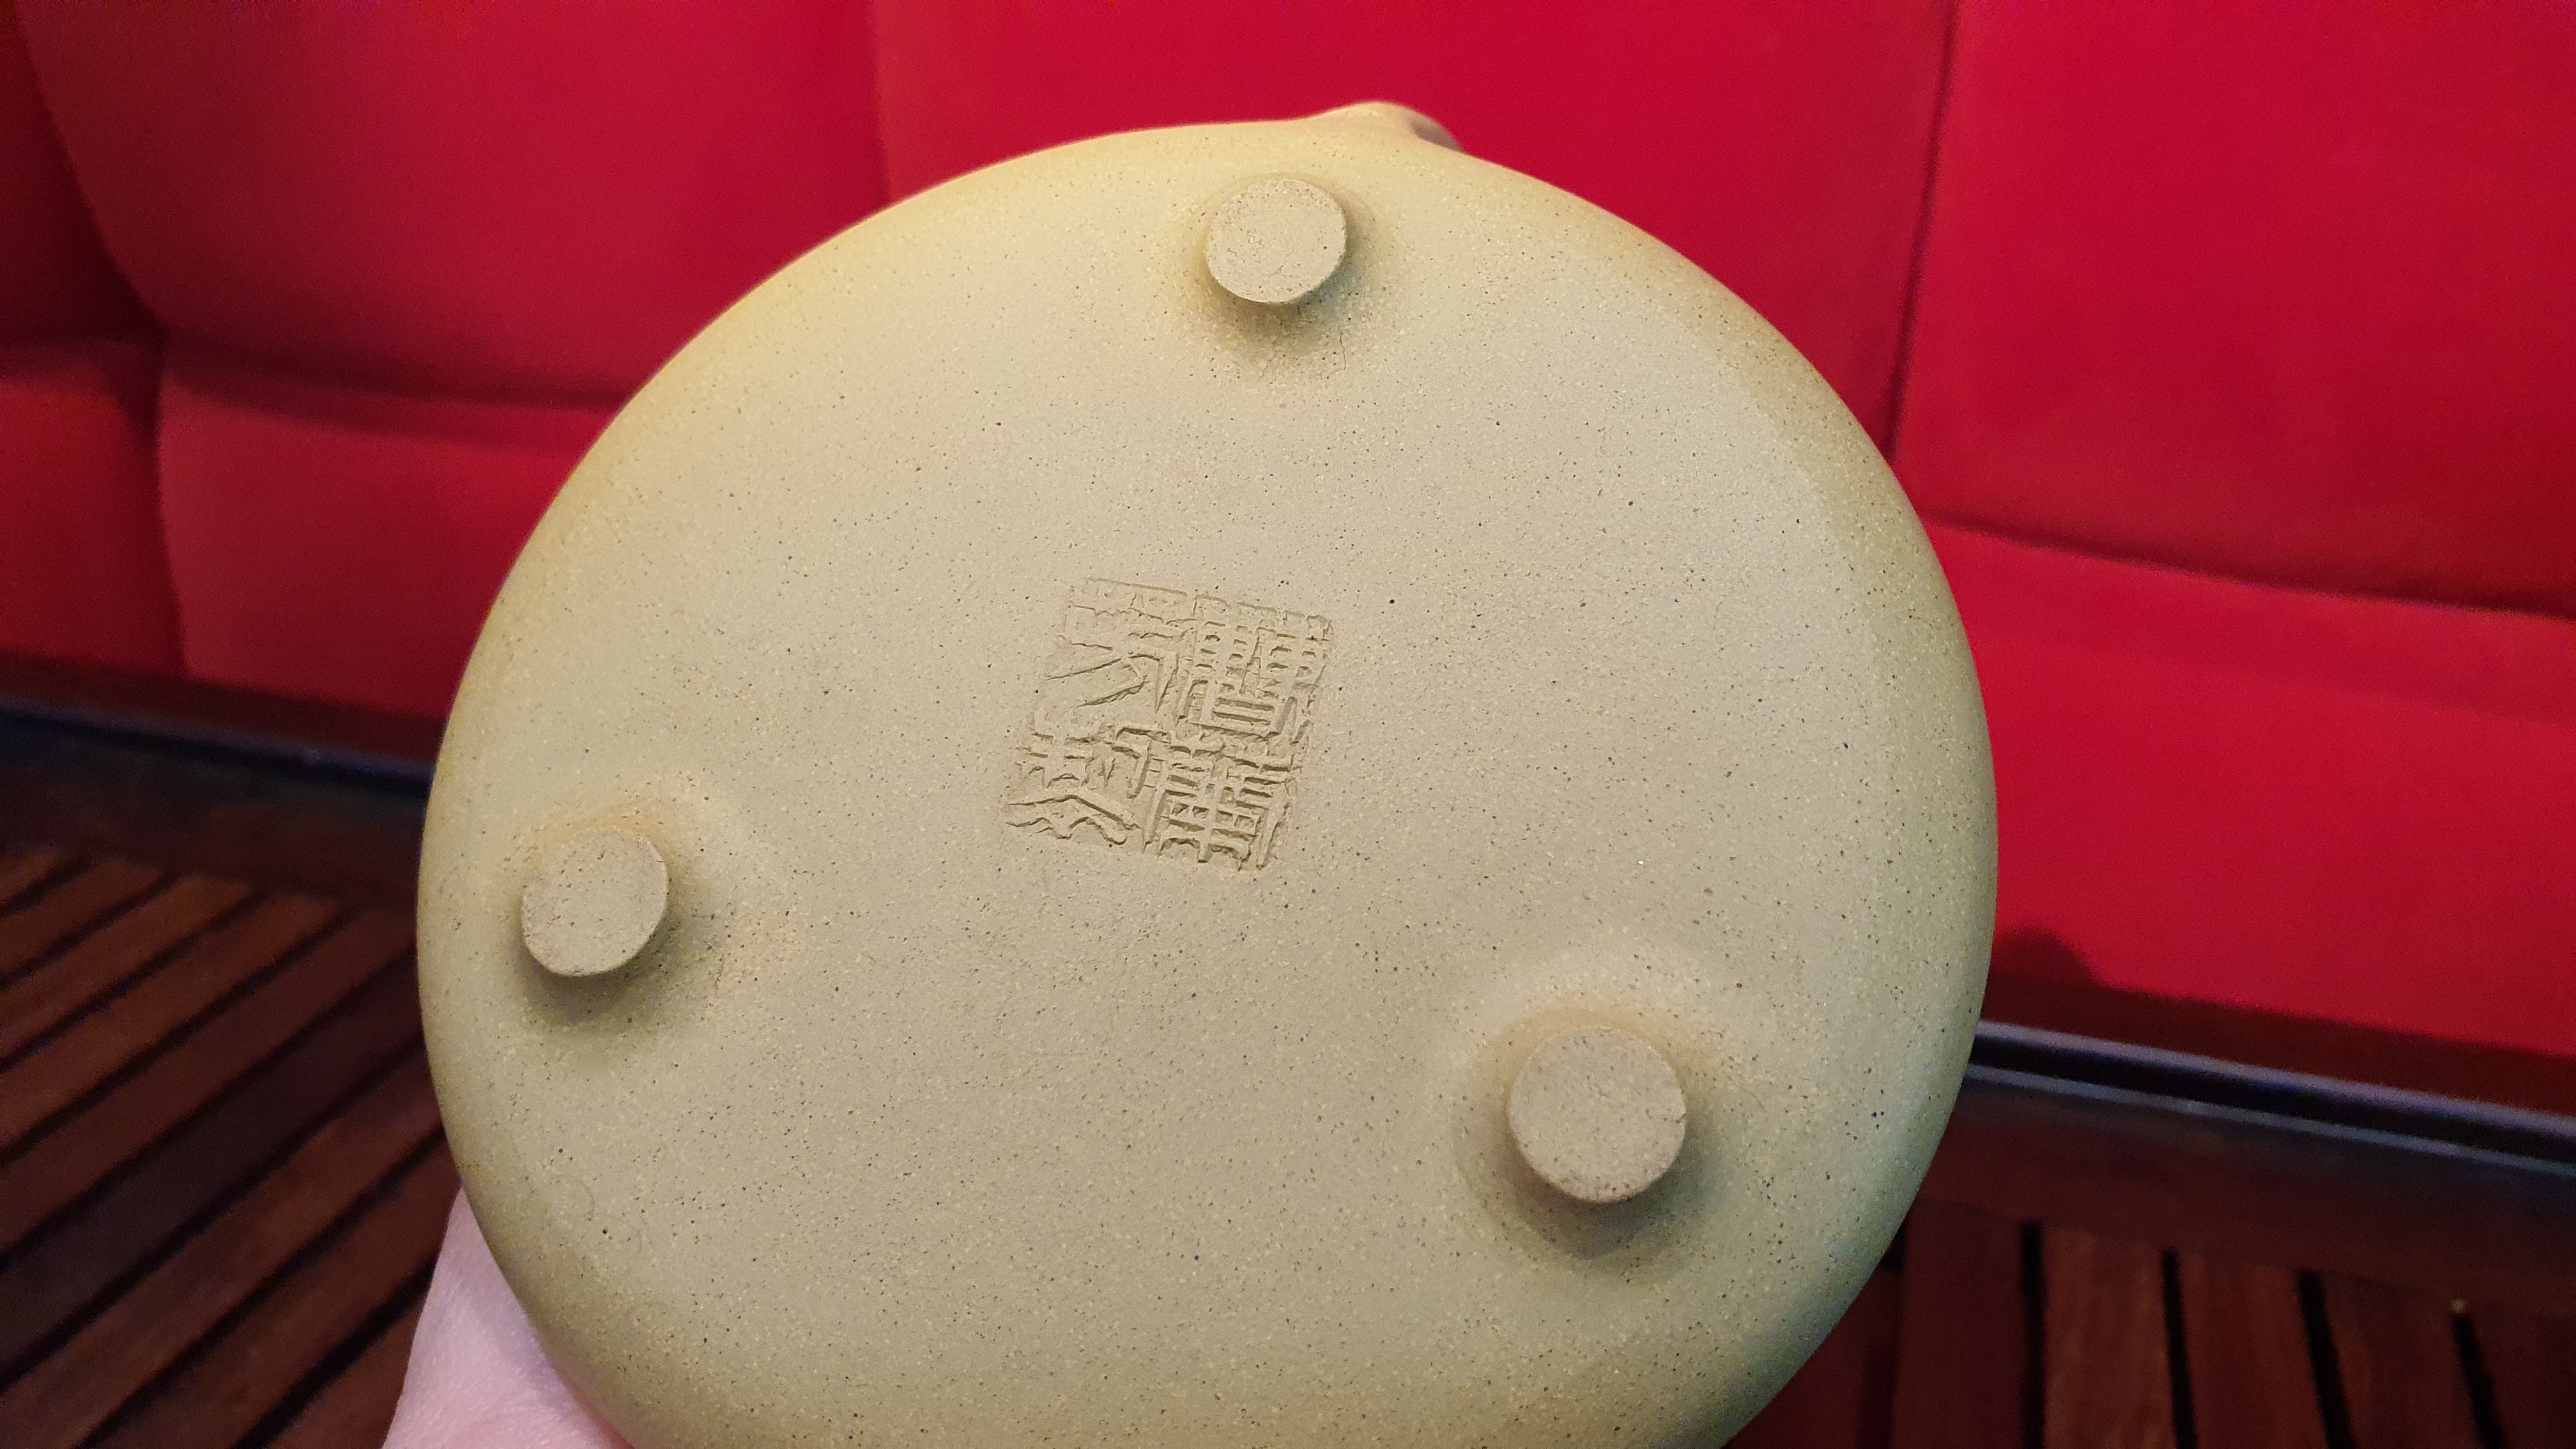 ZiYe ShiPiao 心经石瓢 with engraving of The Heart Sutra - by L2 Senior Master Artist Cao Lan Fang 曹兰芳高级工艺美术师